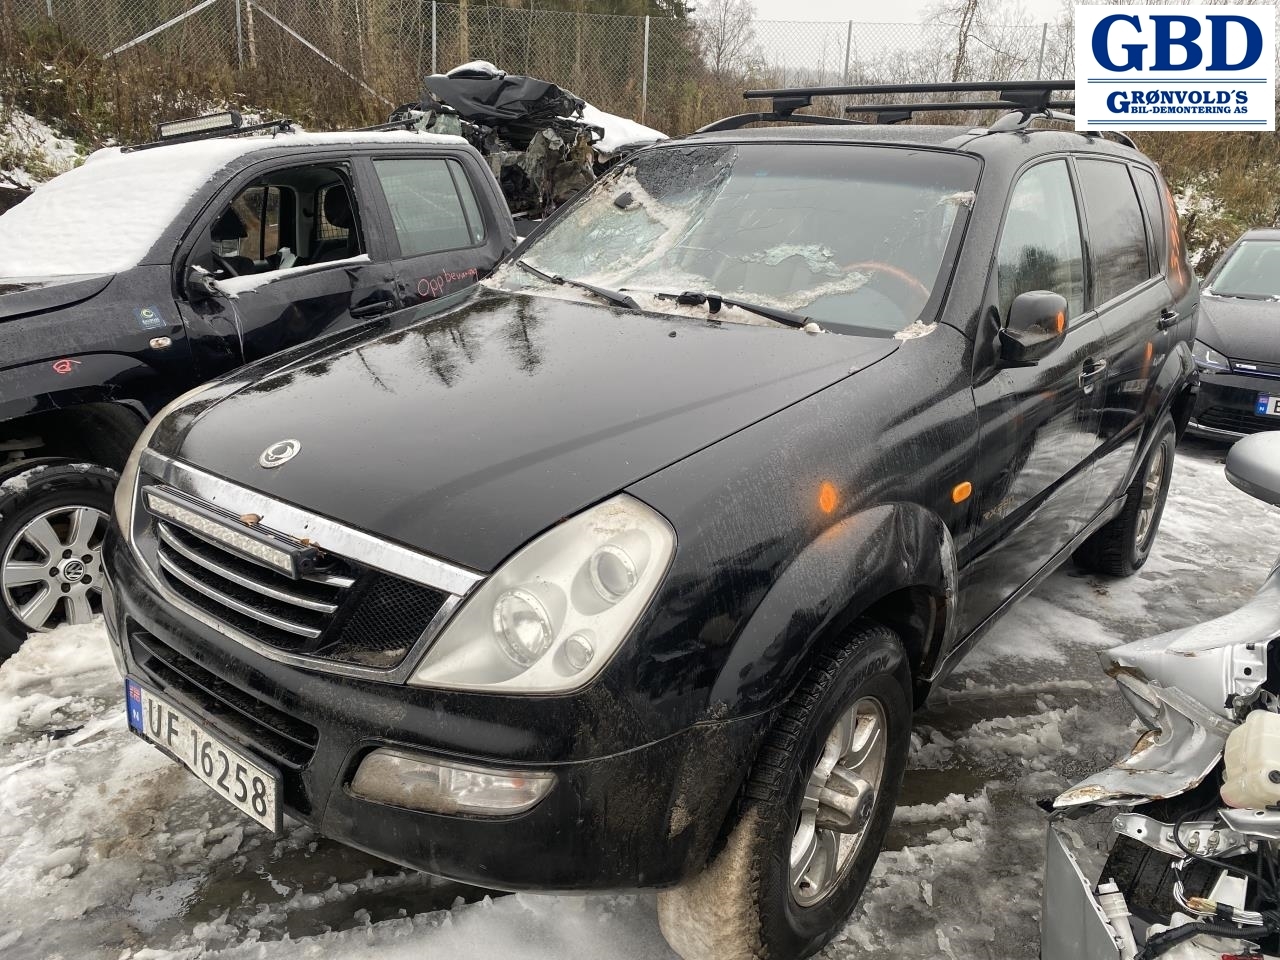 SsangYong Rexton, 2002-2004 (Y200, Fase 1)(|D29ST)